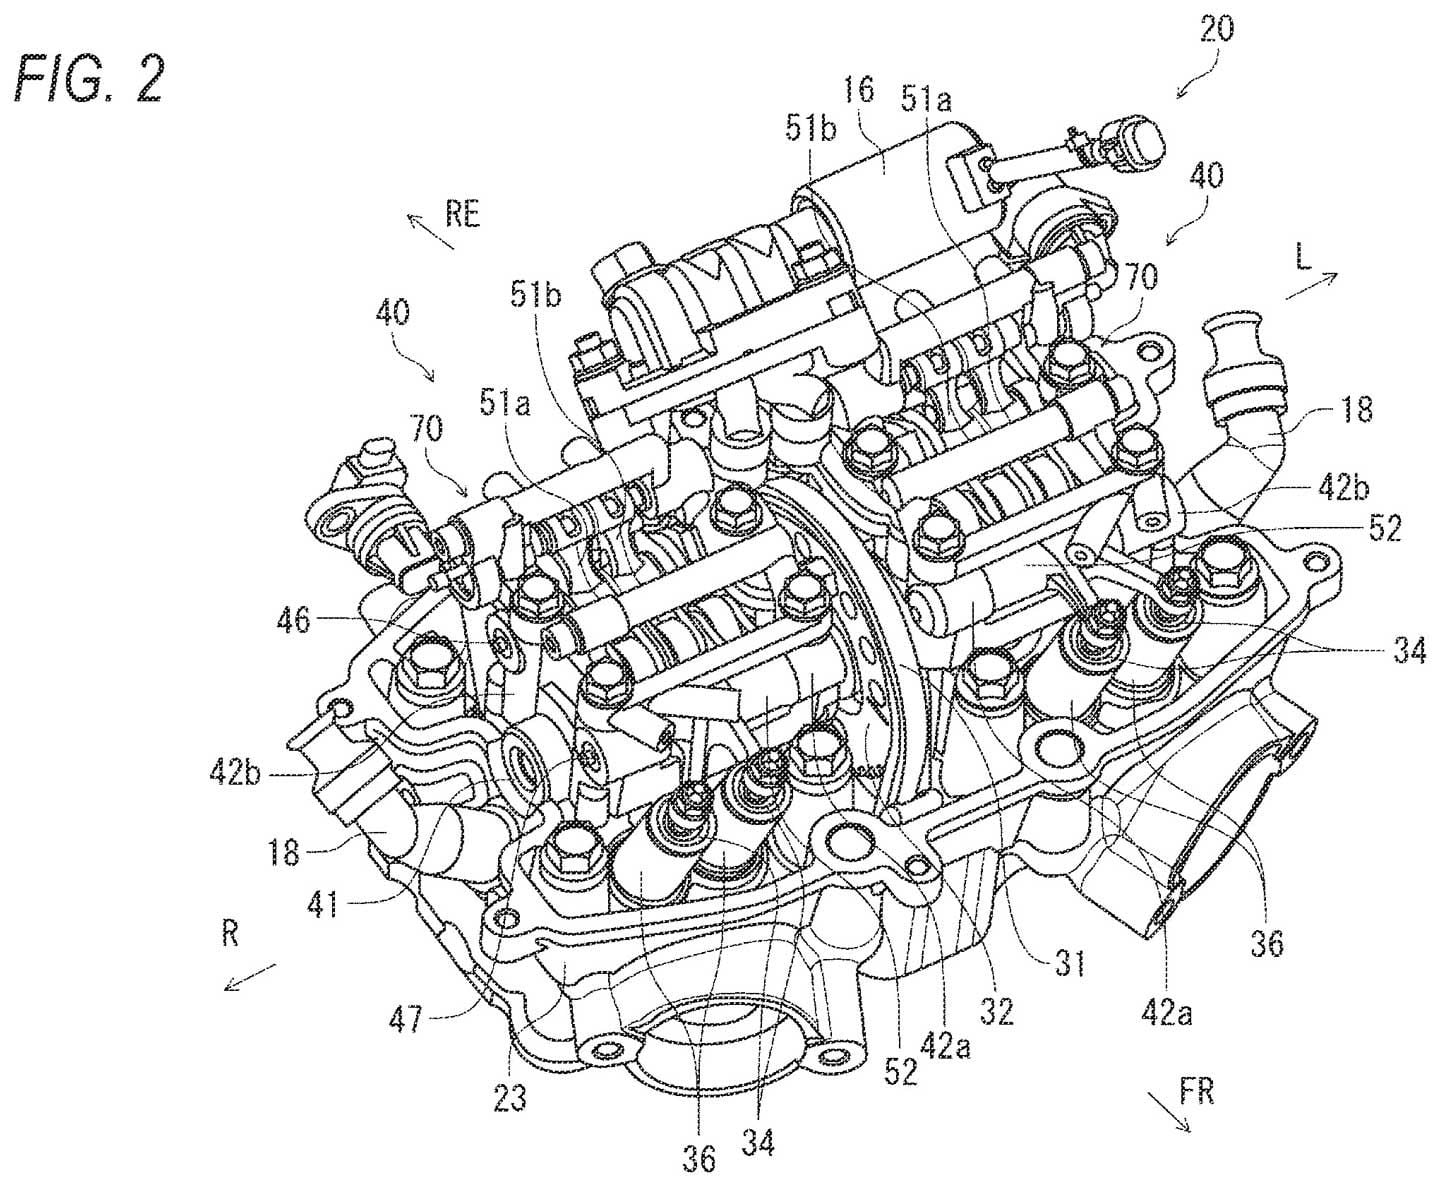 Suzuki is working on a new VVT design for its small-displacement engines.